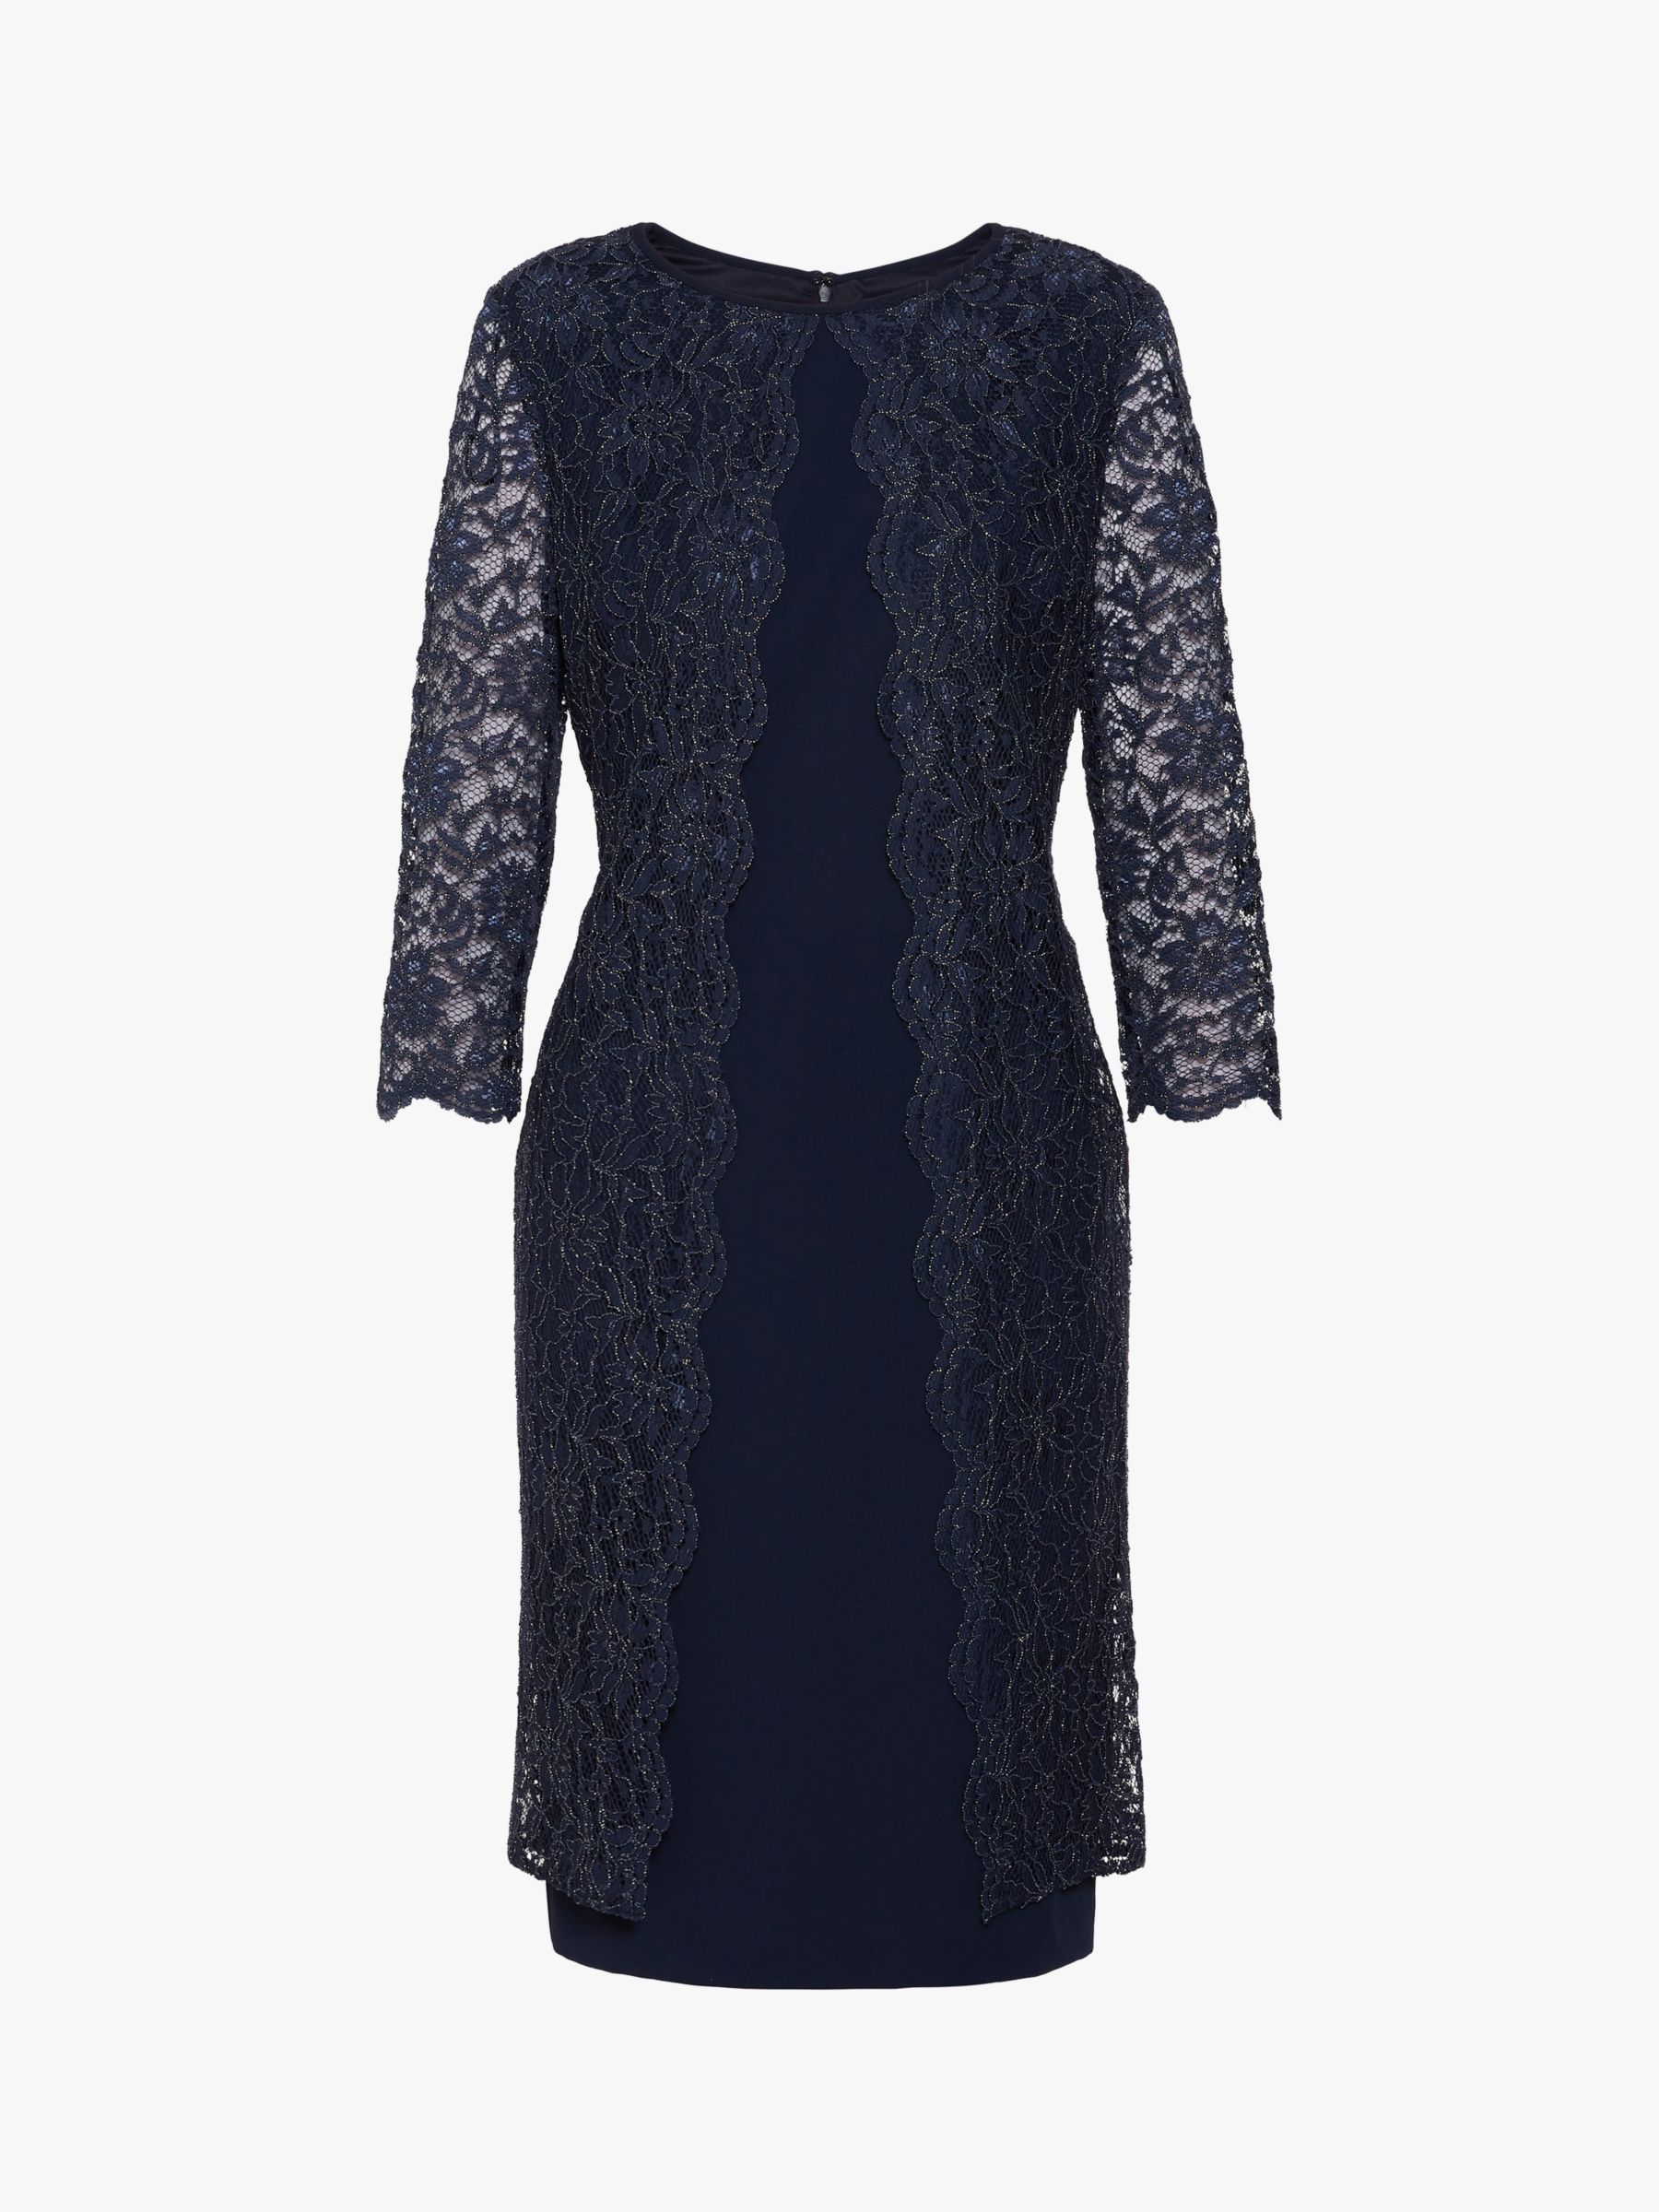 Gina Bacconi Dailyn Floral Lace Dress, Spring Navy at John Lewis & Partners